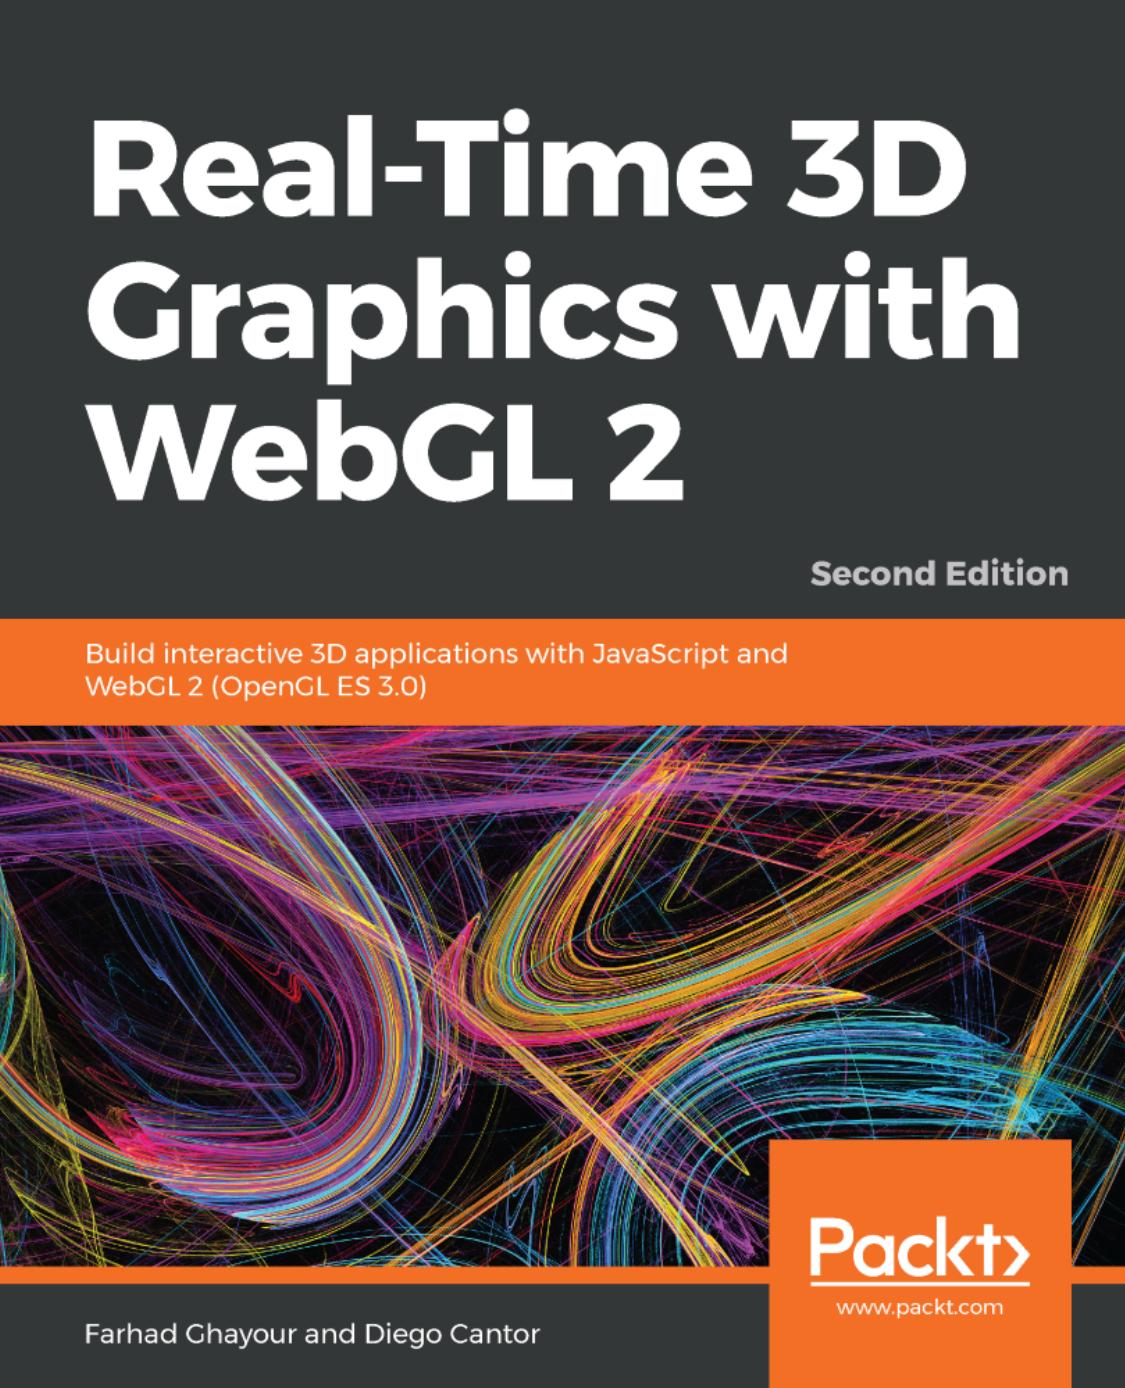 Real-Time 3D Graphics With WebGL 2: Build Interactive 3D Applications With JavaScript and WebGL 2 (OpenGL ES 3. 0), 2nd Edition